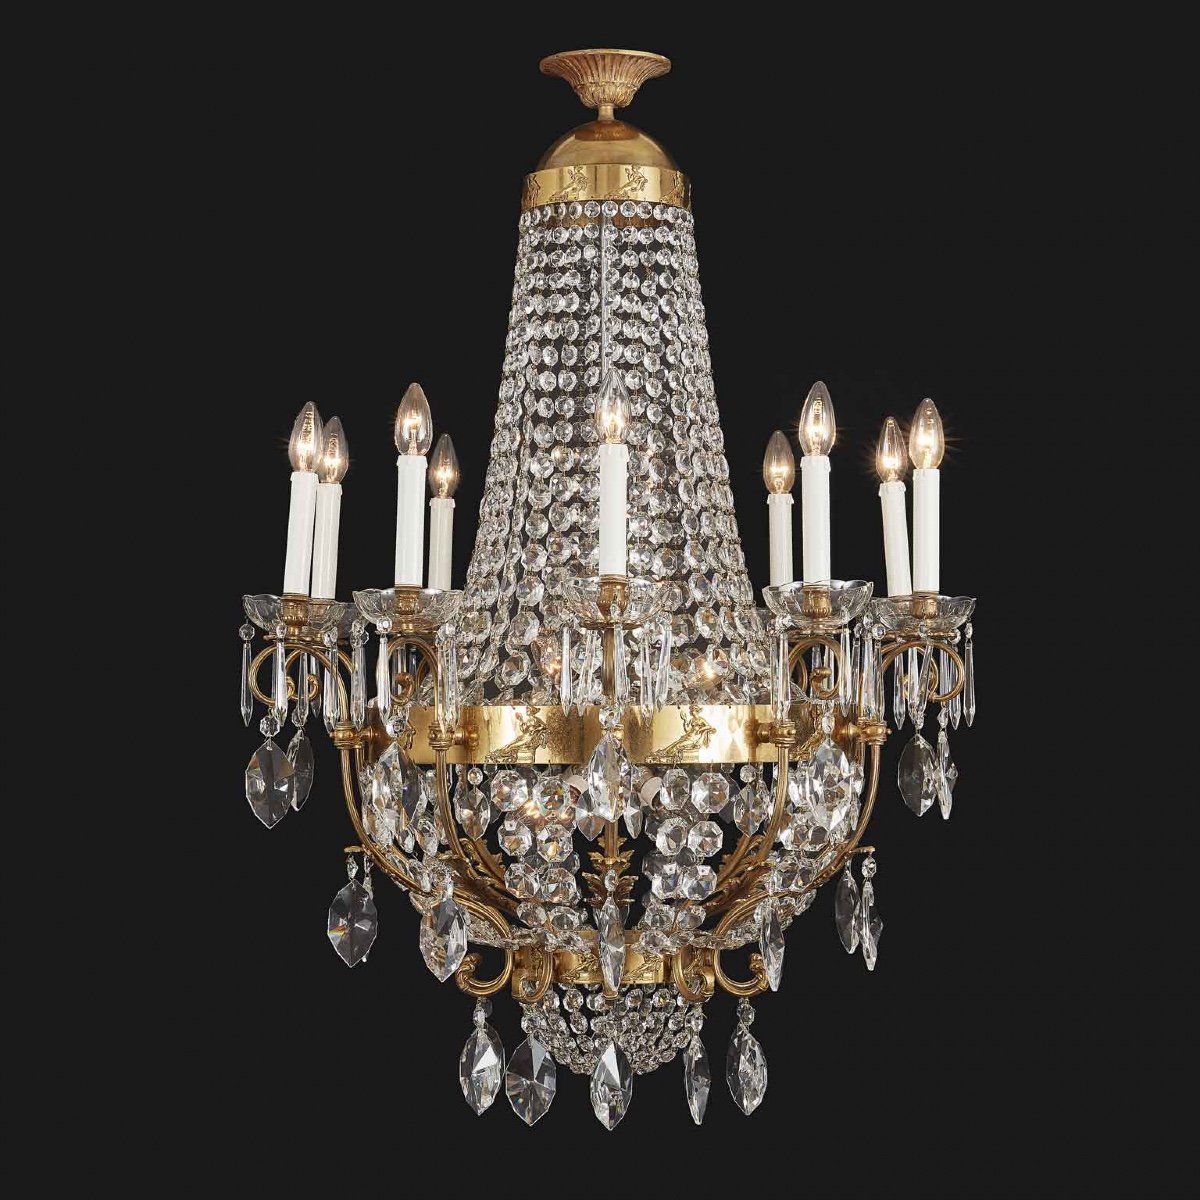 20th Century Italian Neoclassical Style Crystal Chandelier With Roman Female Figures-photo-2